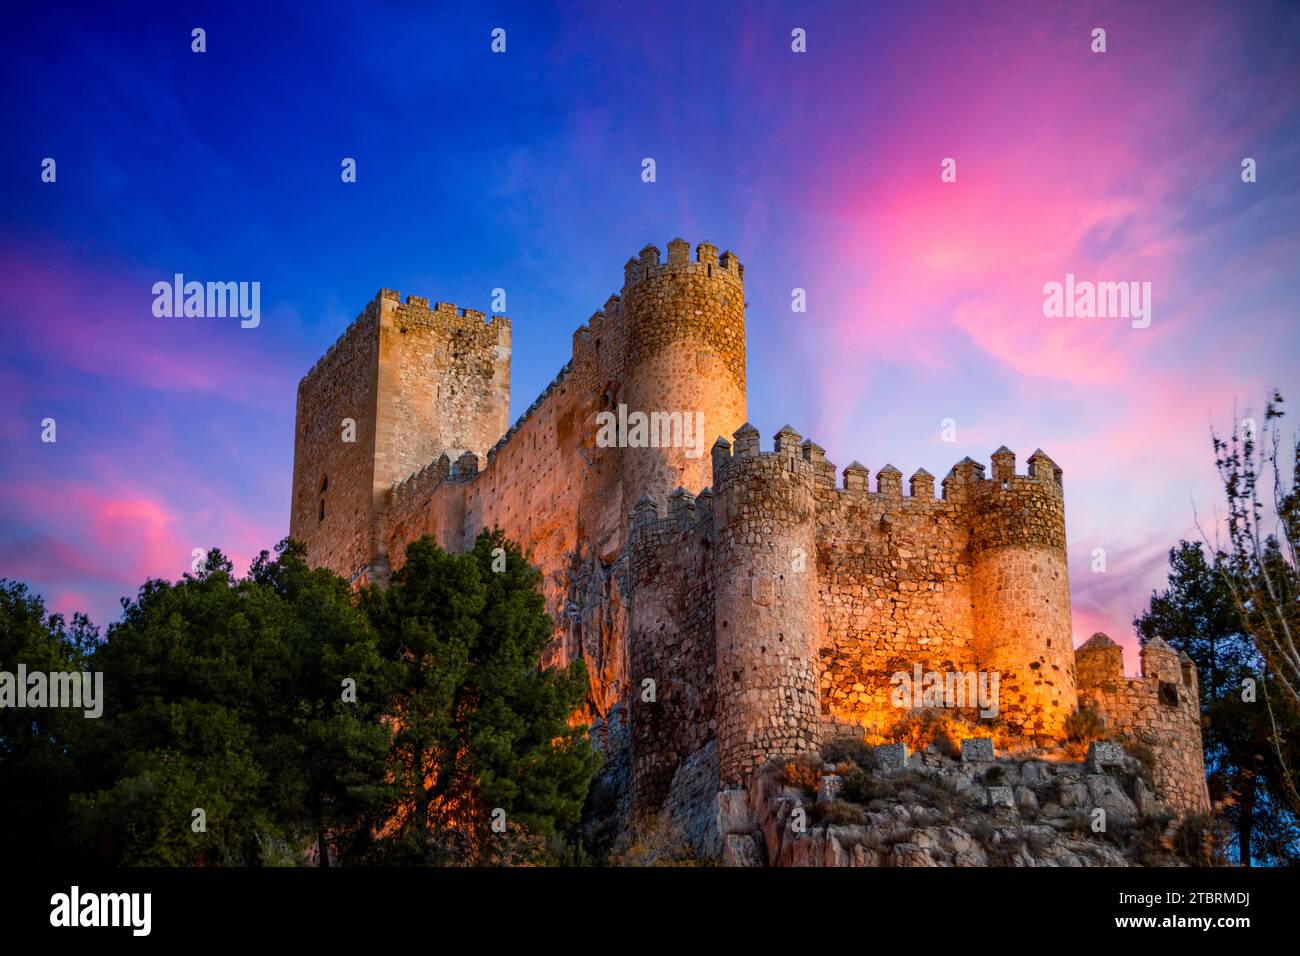 Spectacular view of the medieval castle of Almansa, Albacete, Spain, on a cliff at dawn Stock Photo